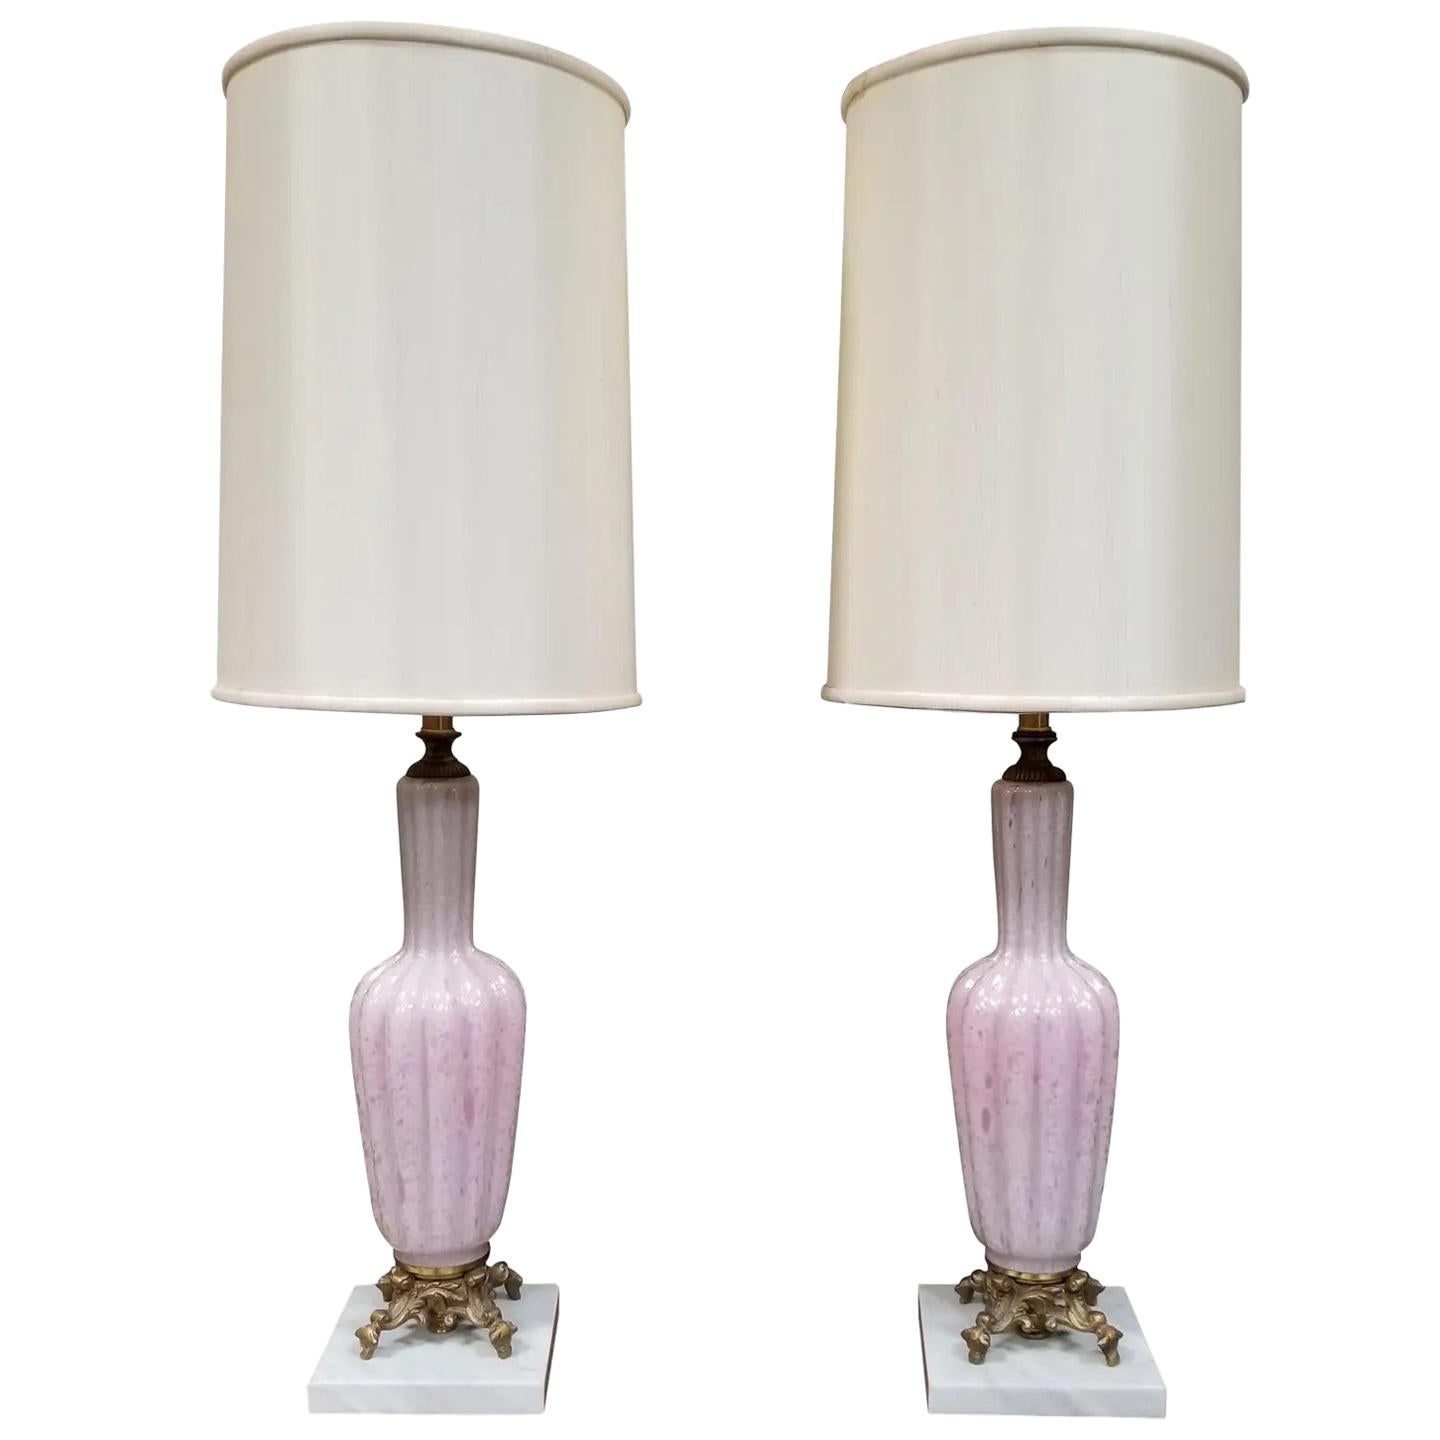 Murano Pink Opalescent Glass Table Lamps, a Pair